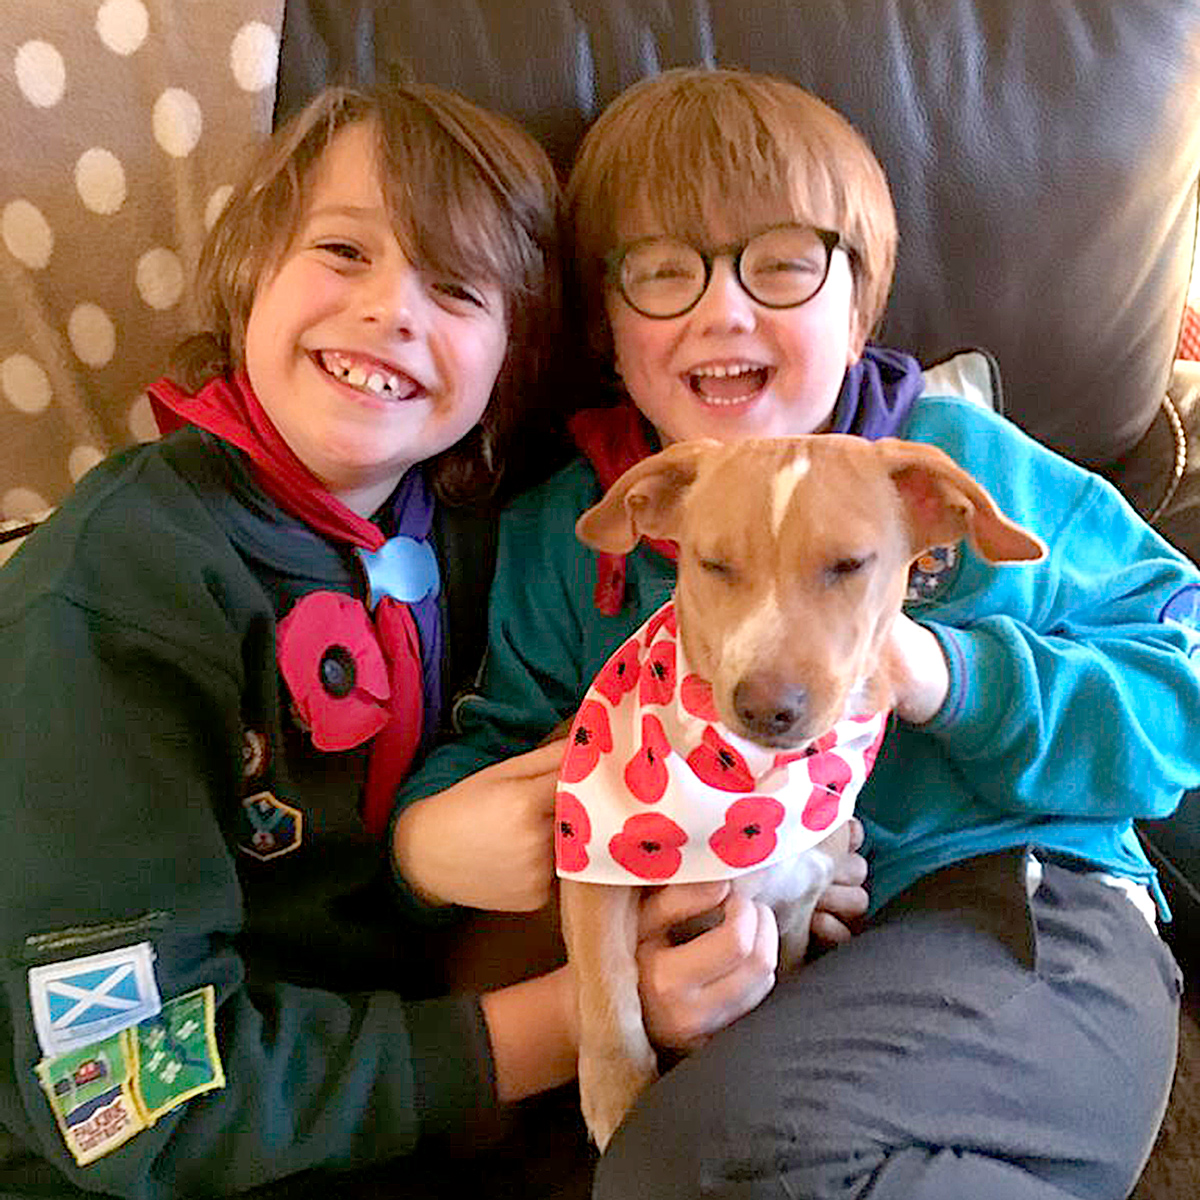 Archie and Alfie with their puppy Diego all wearing poppies